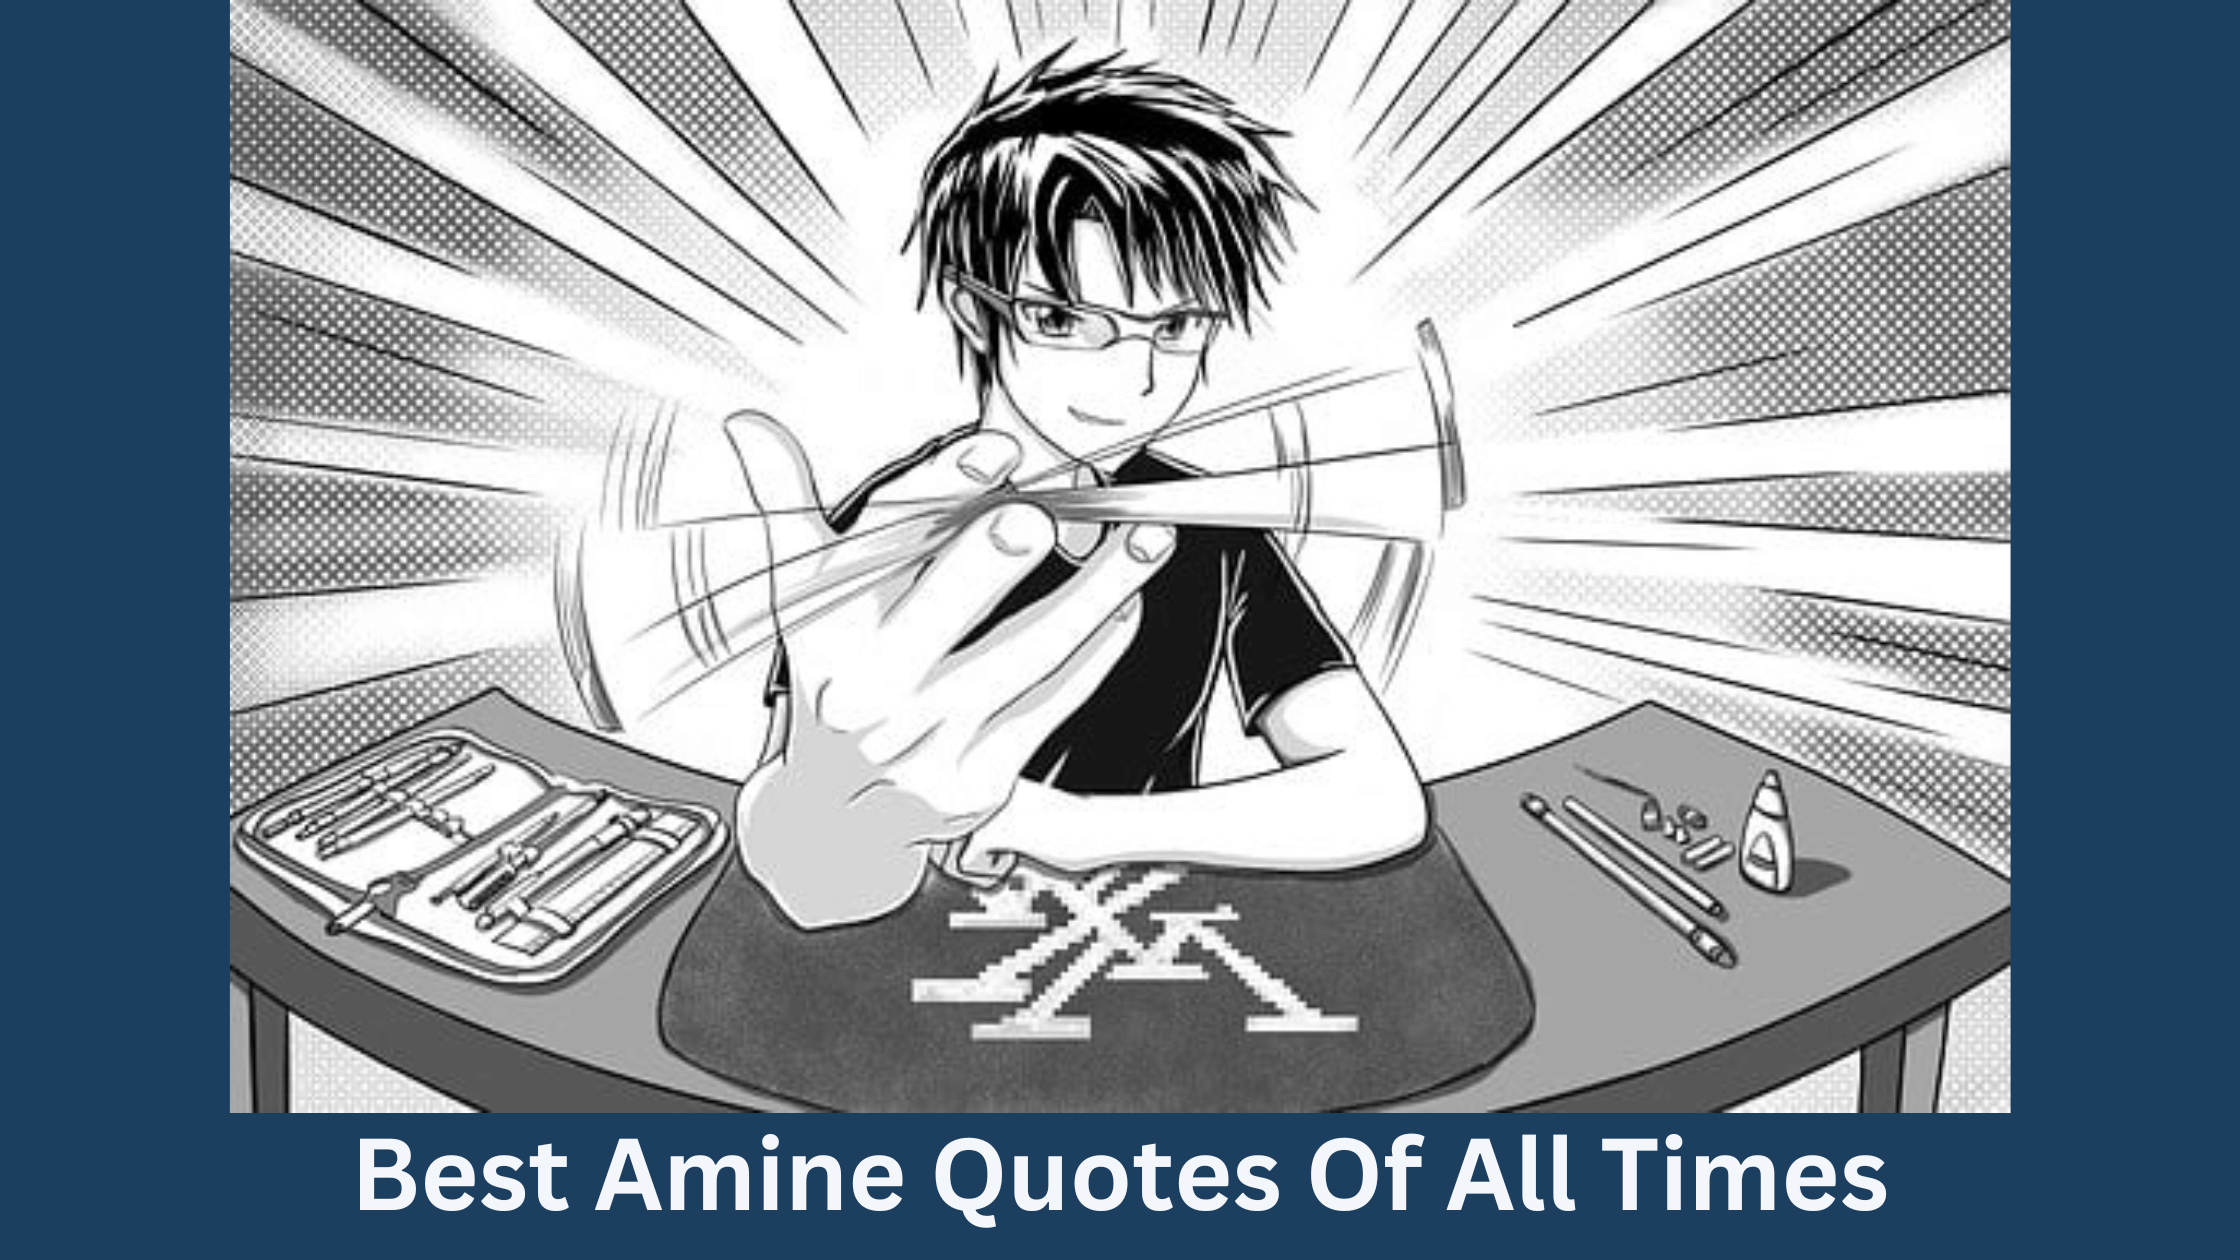 Best Amine Quotes Of All Times